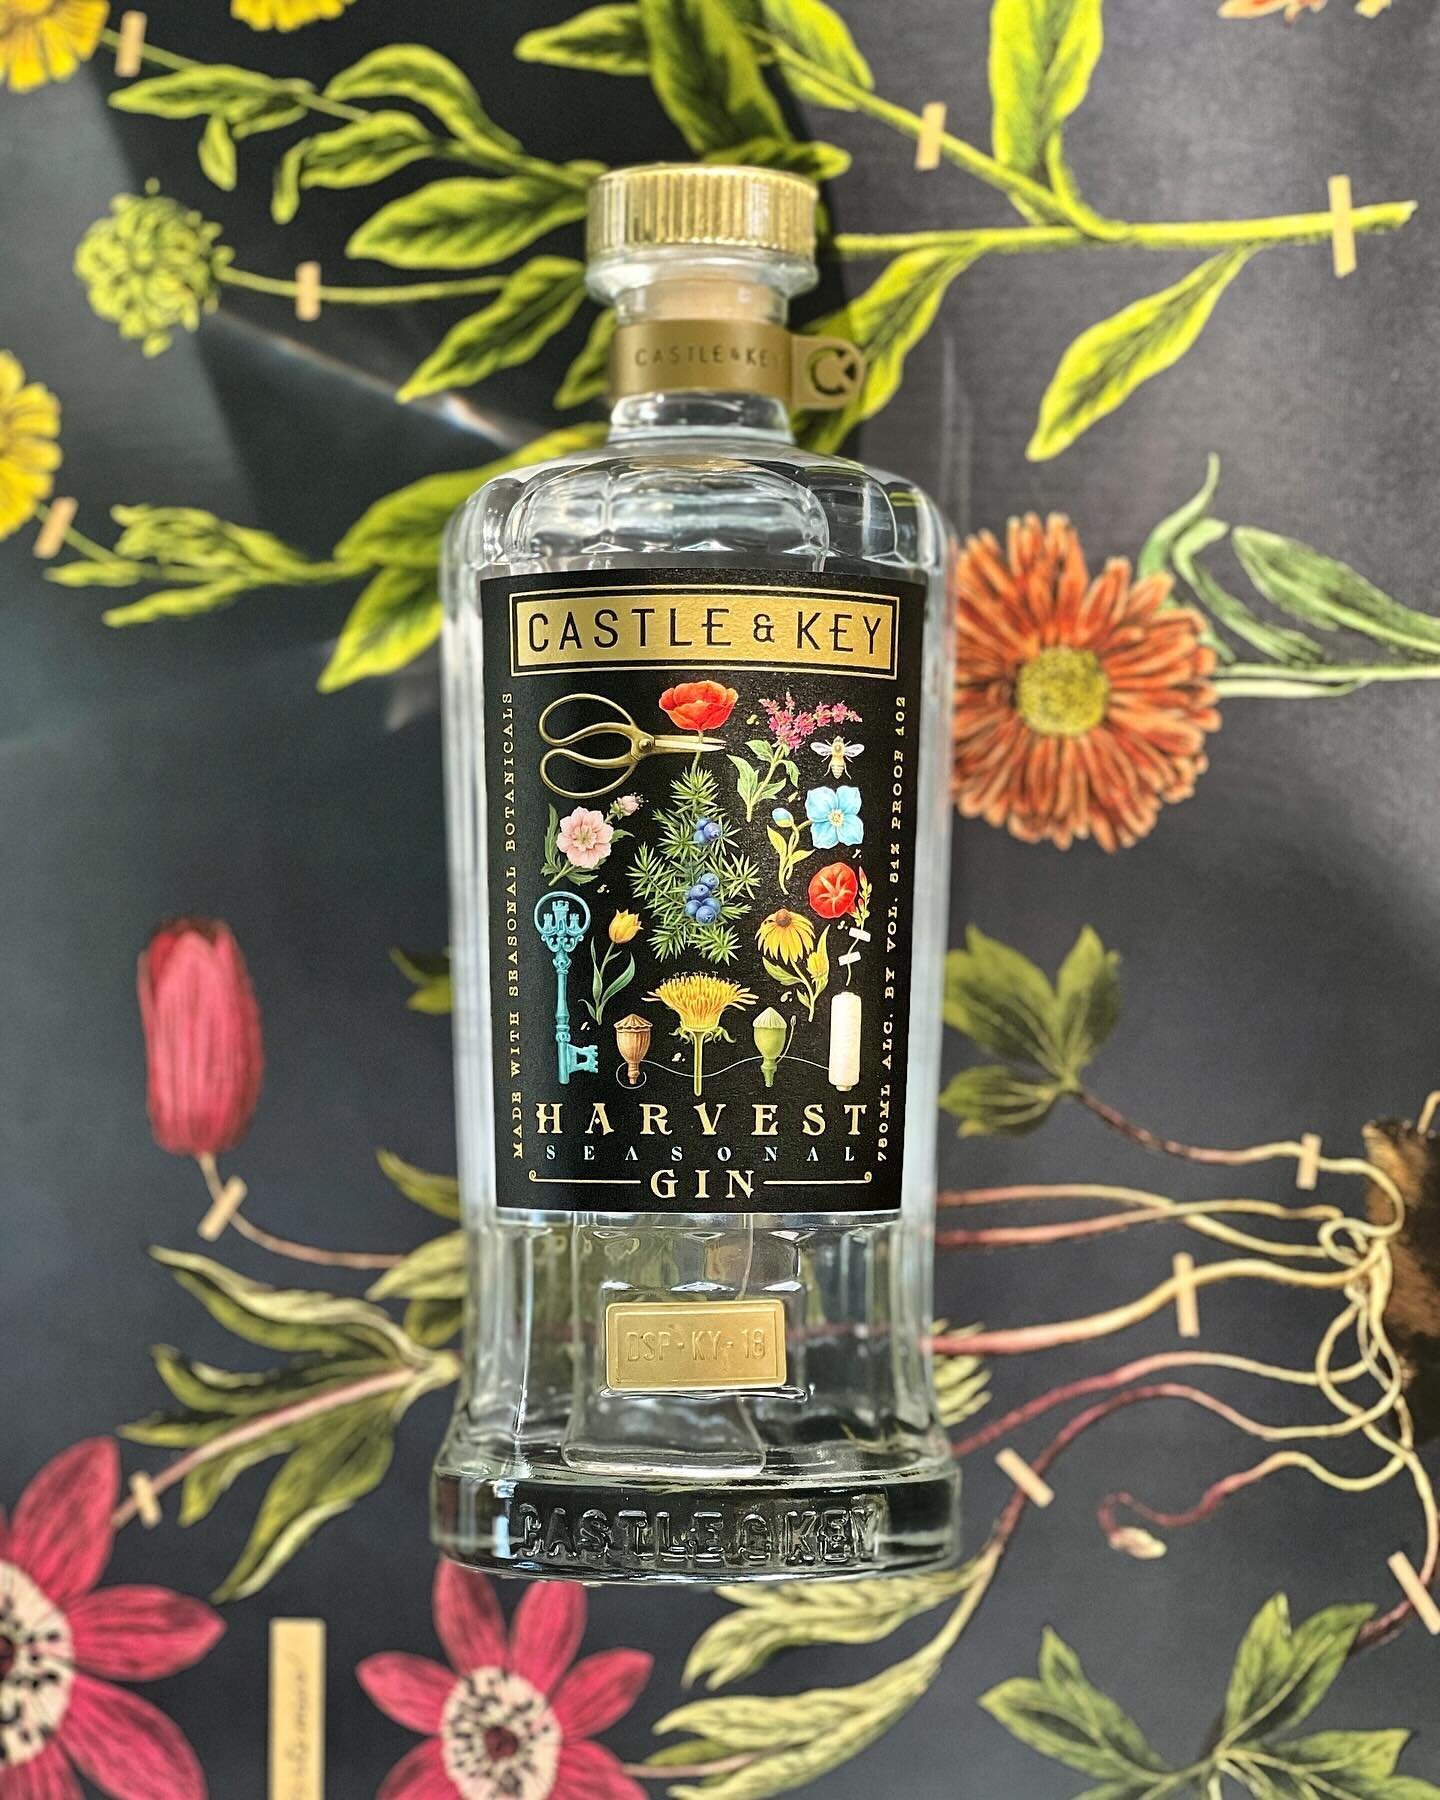 Harvesting Fall flavors ✨ @castleandkey limited-release Harvest Seasonal Gin.

One of their two rotating seasonal gins, Harvest Seasonal Gin highlights the notes of fall / winter with a unique flavor profile representative of the seasons.

Drink it i